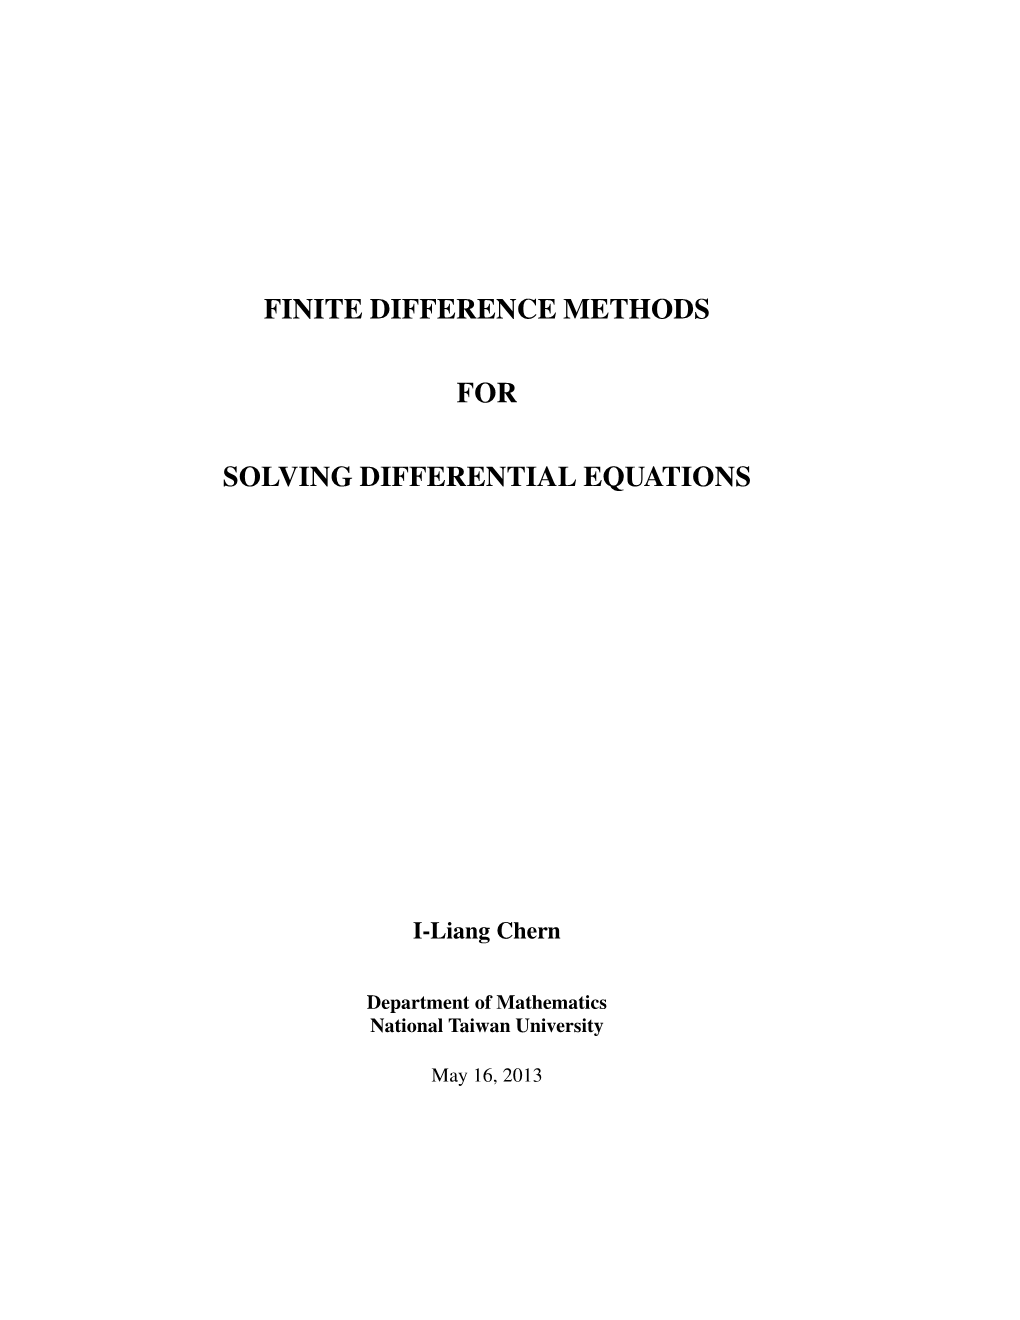 Finite Difference Methods for Solving Differential